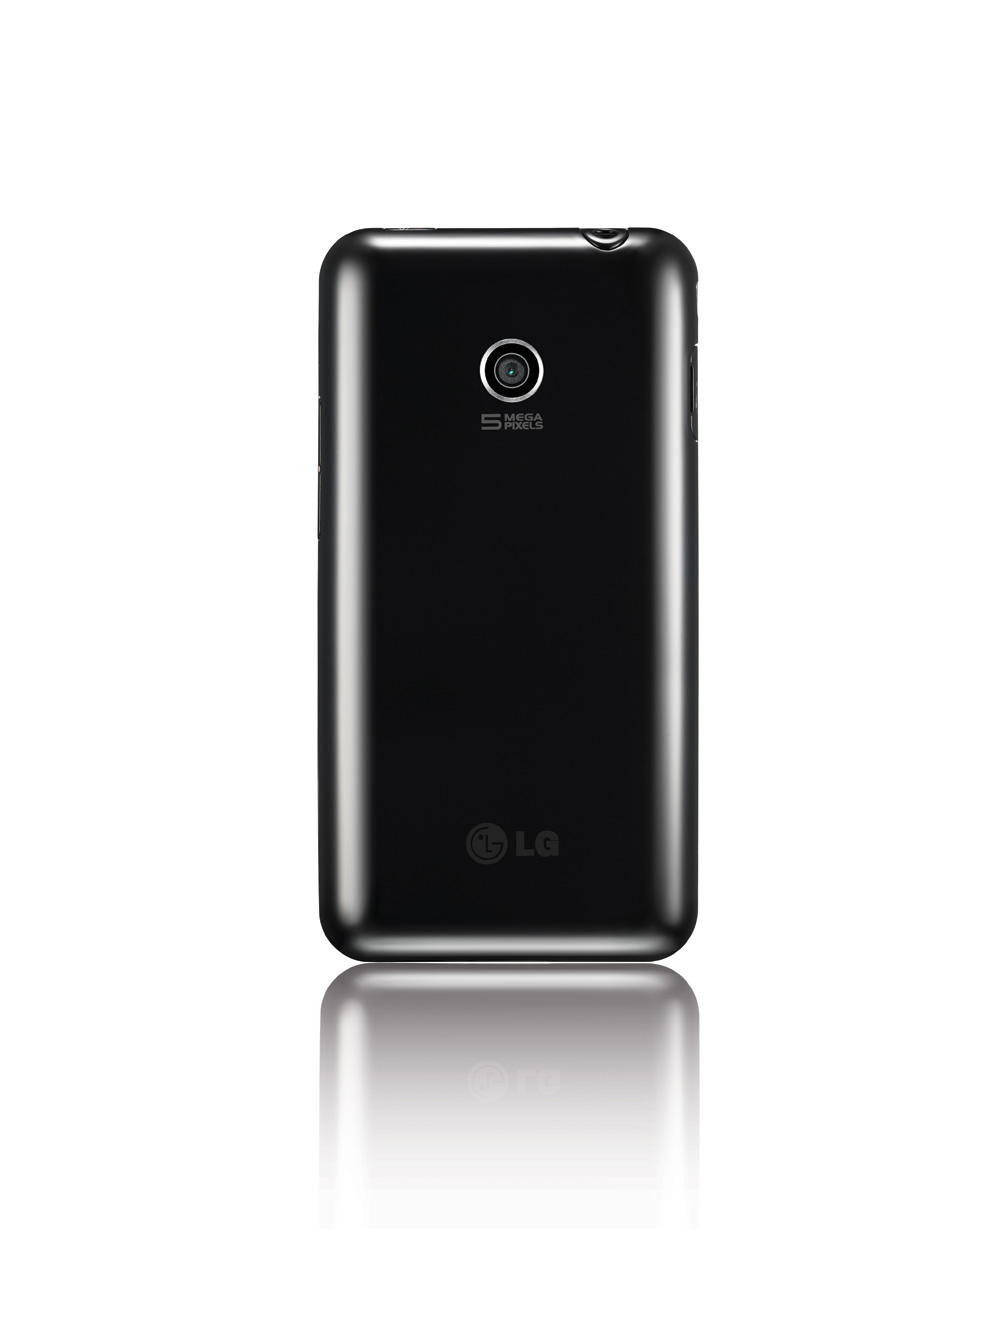 Rear view of the LG Optimus Chic’s black variant